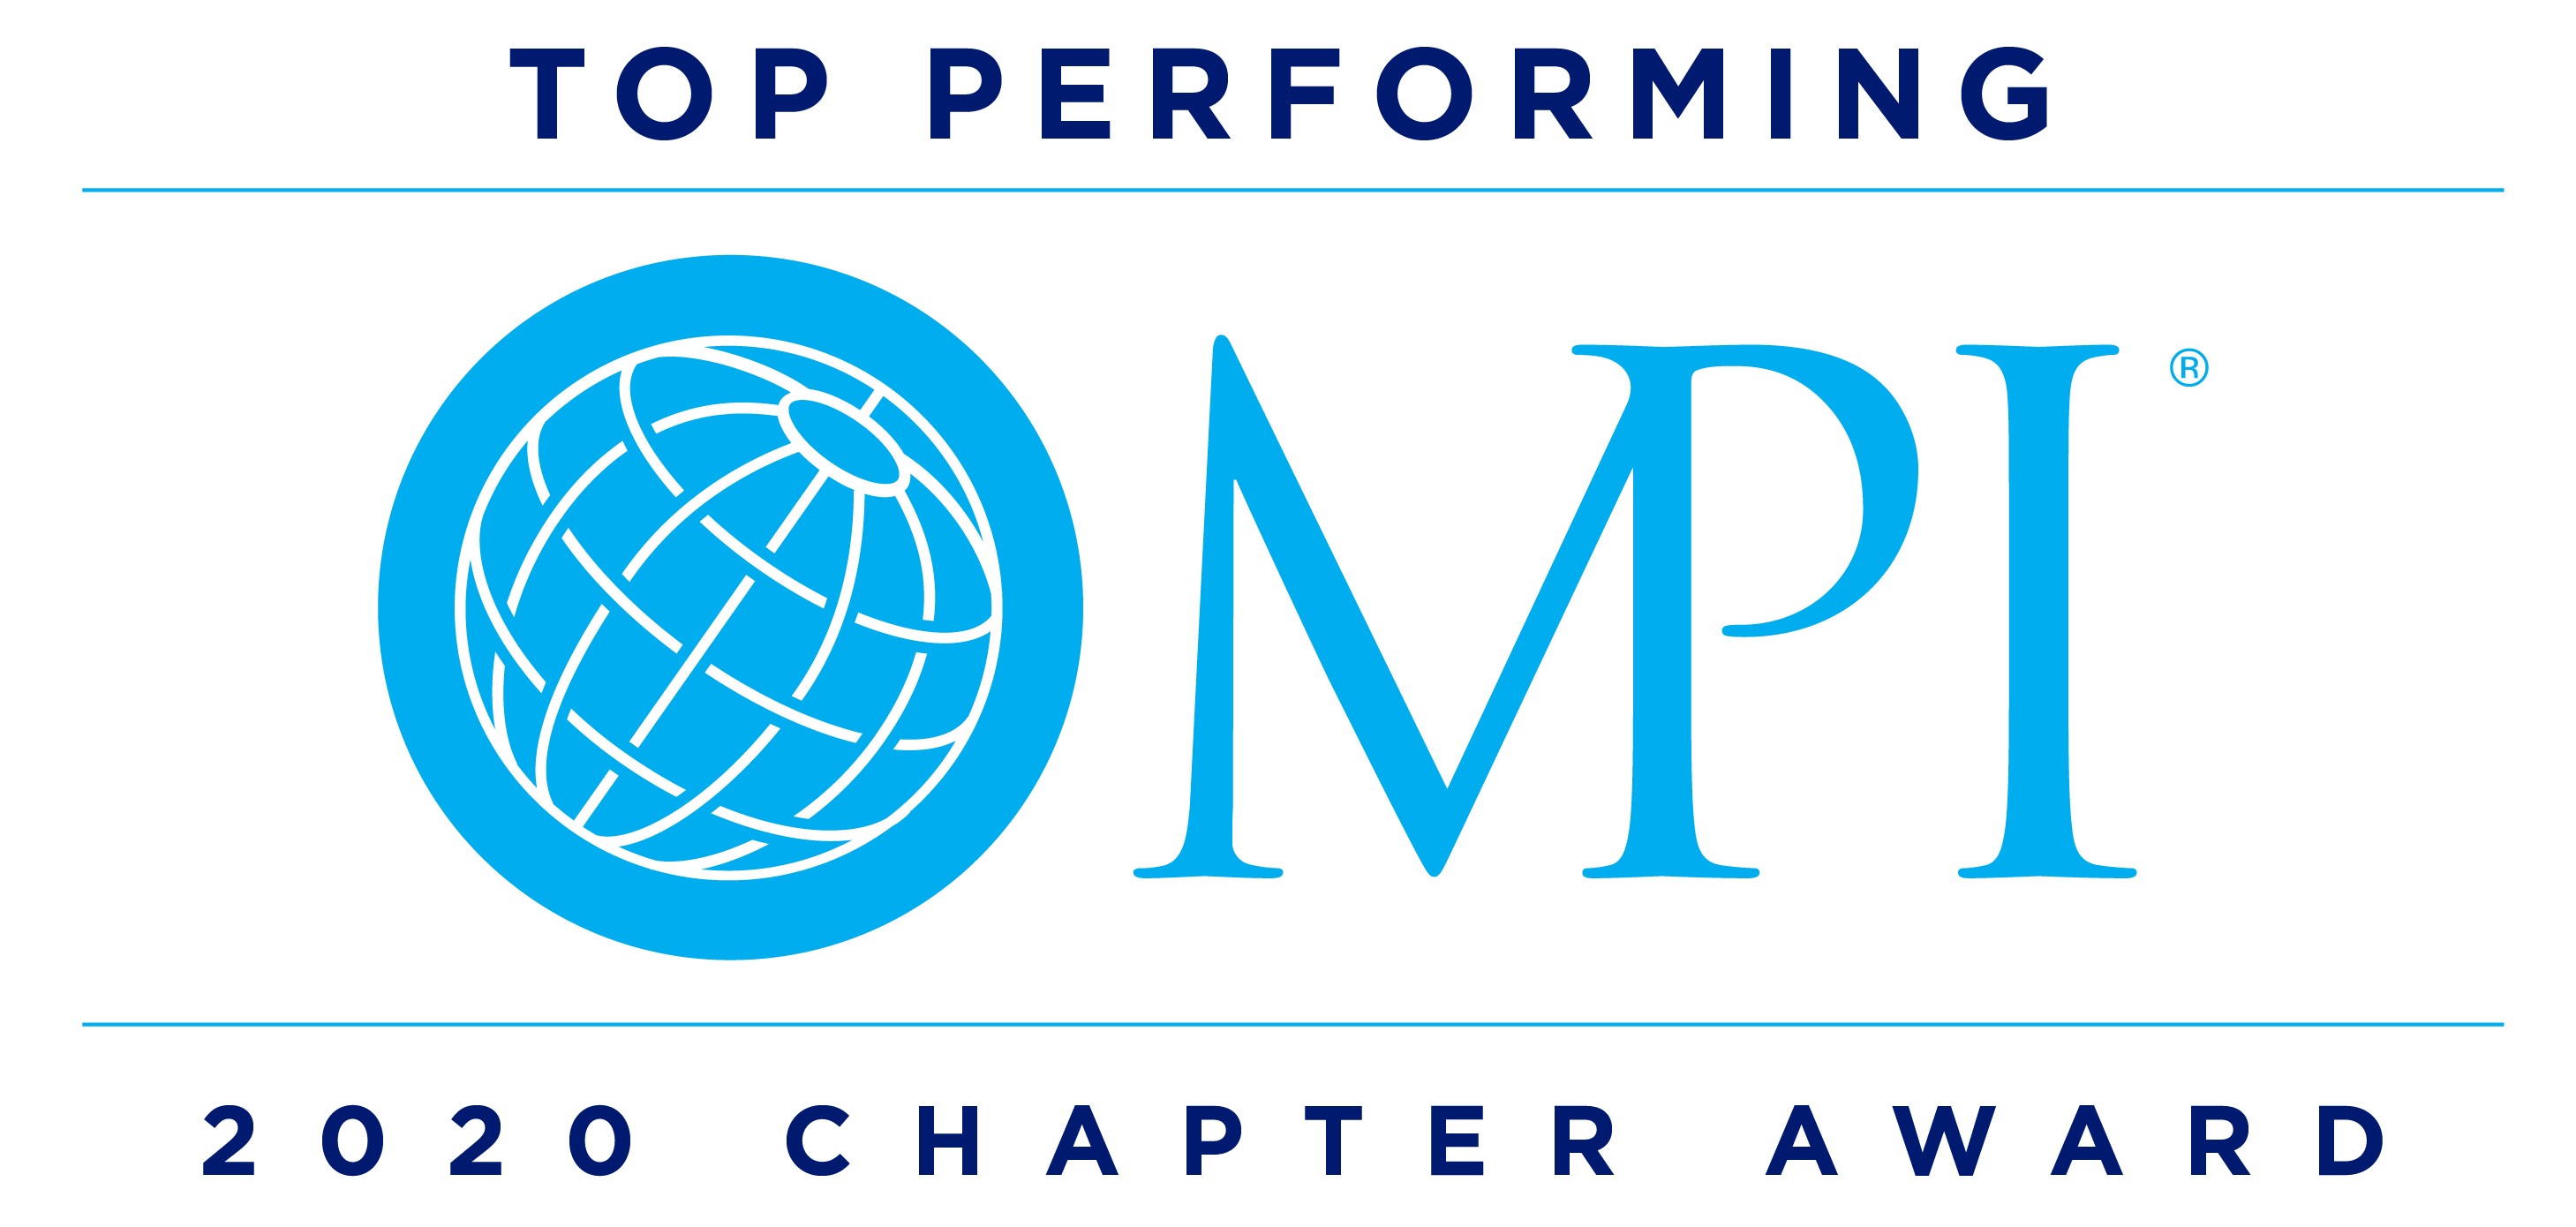 ChapterAwards_Top Performing2020